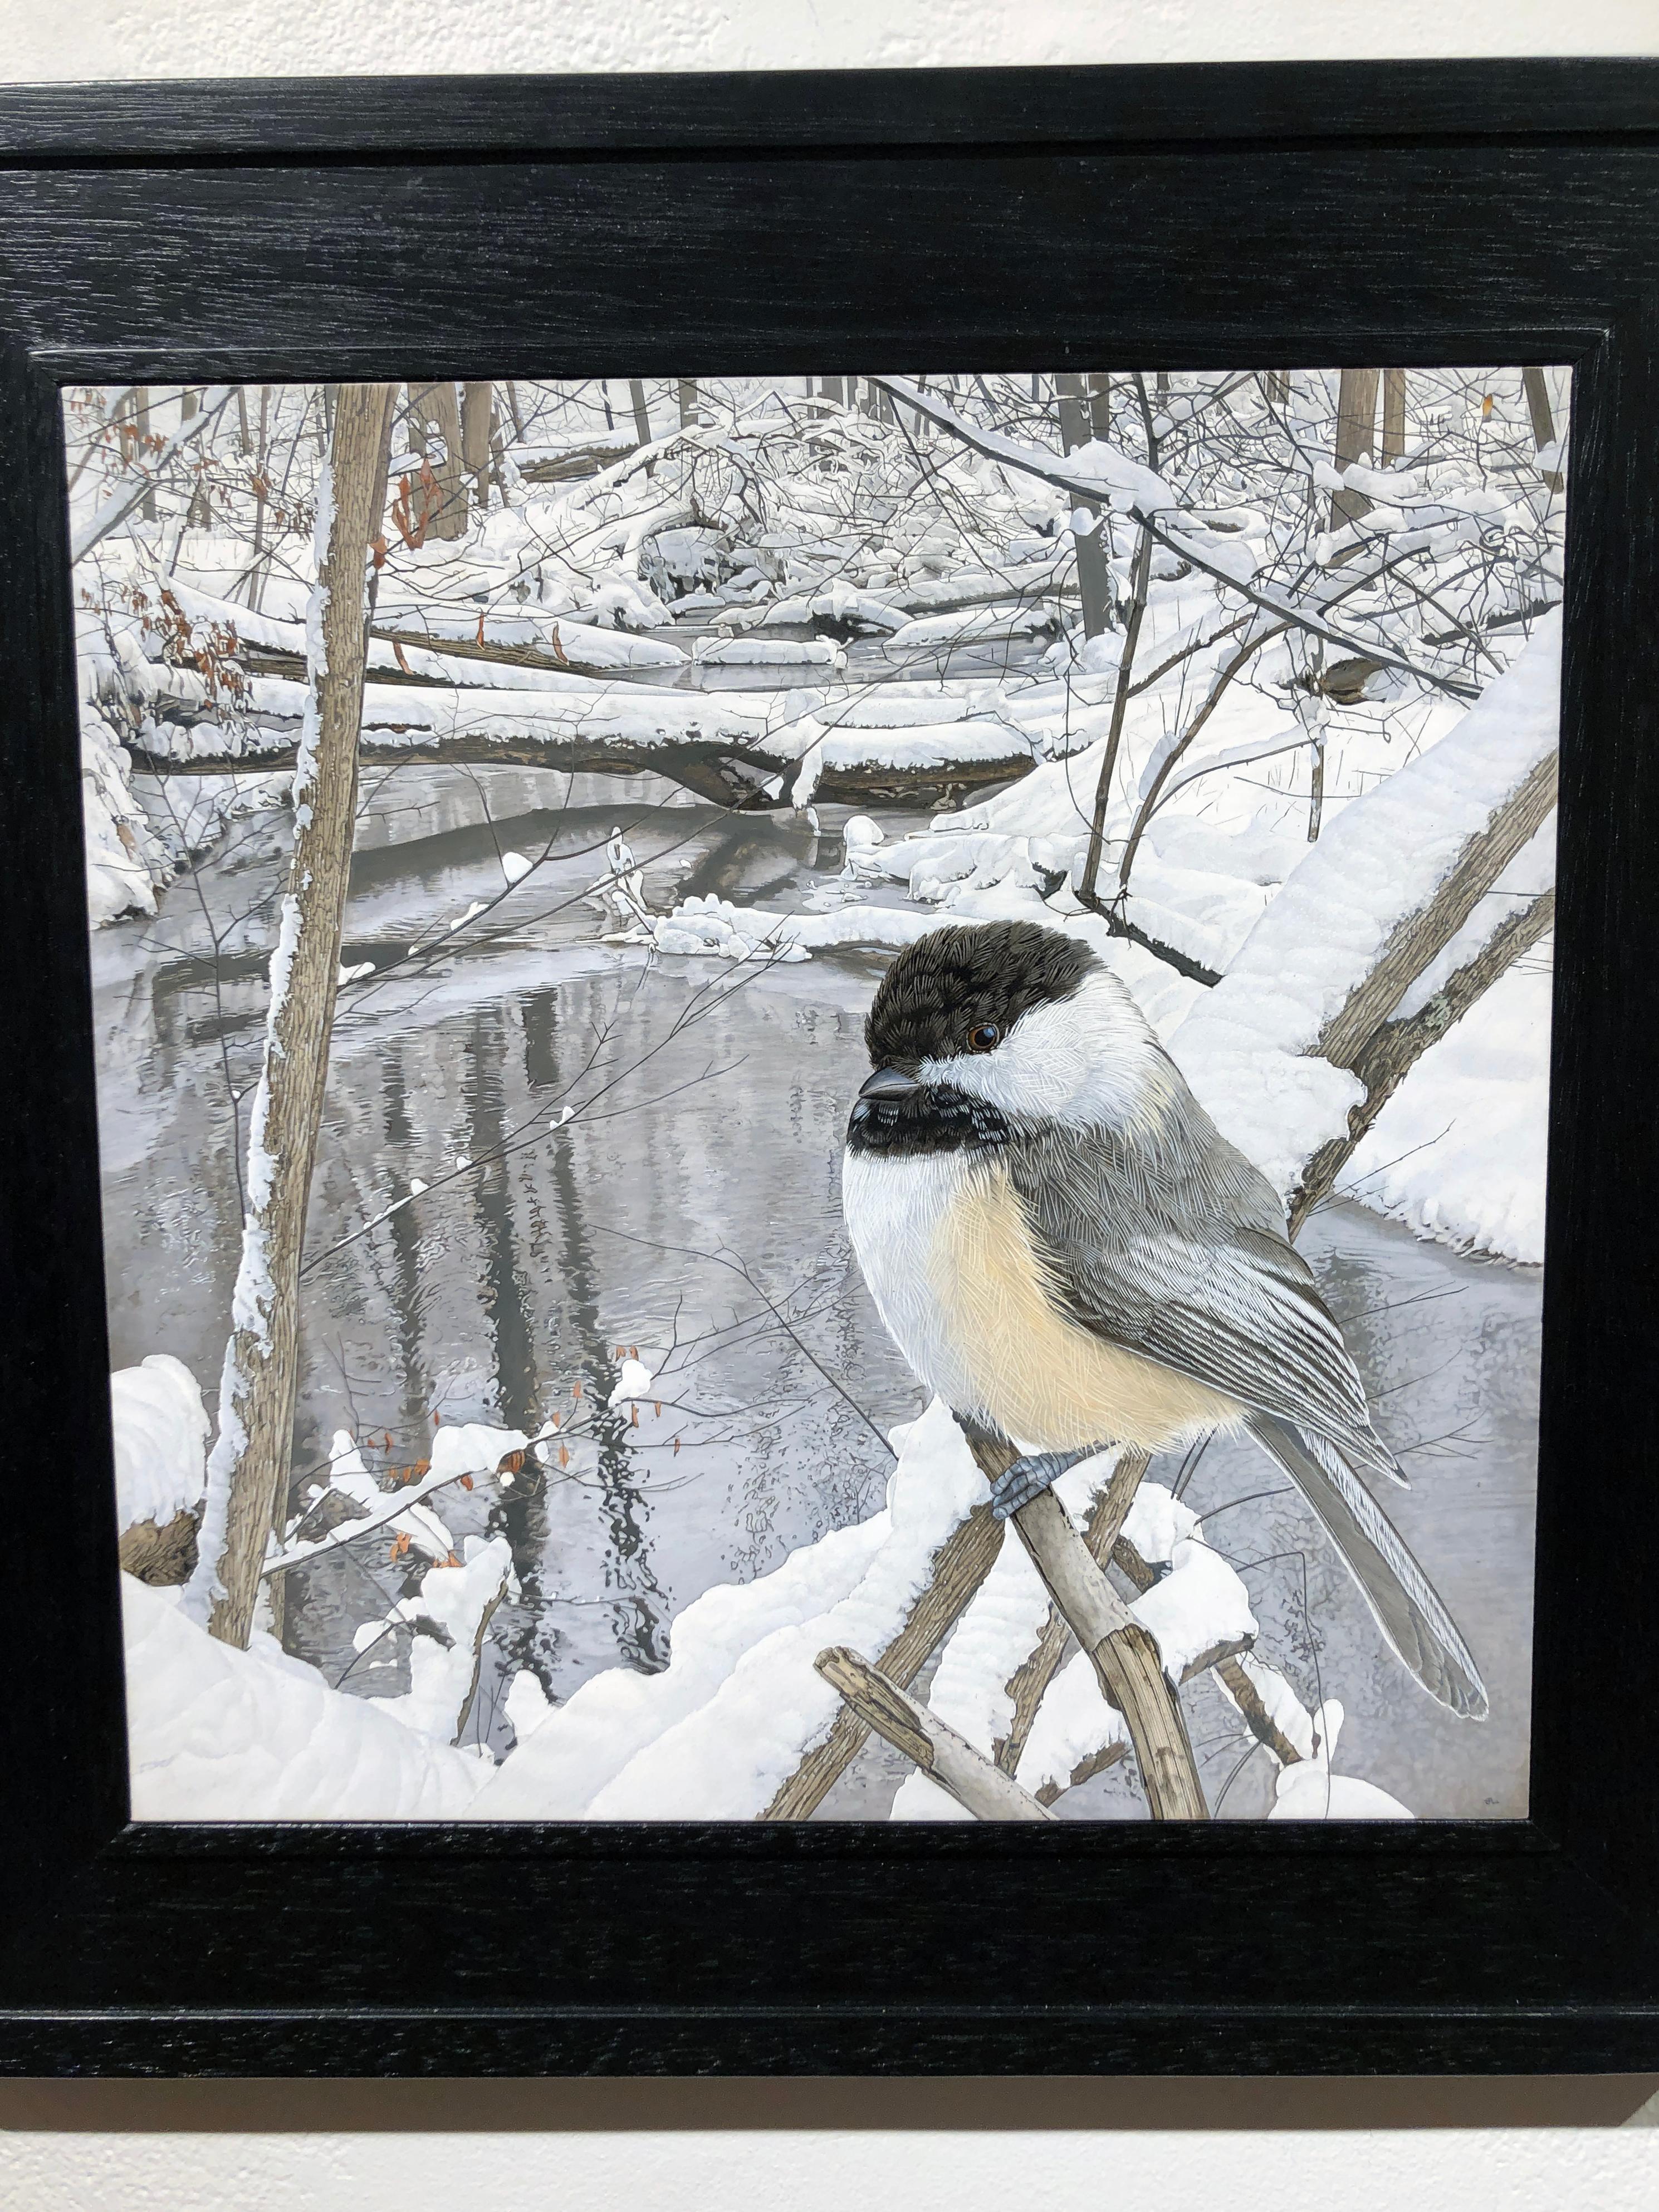 Chickadee at Hasler Creek - Photorealistic Painting of Bird in a Winter Scene 6